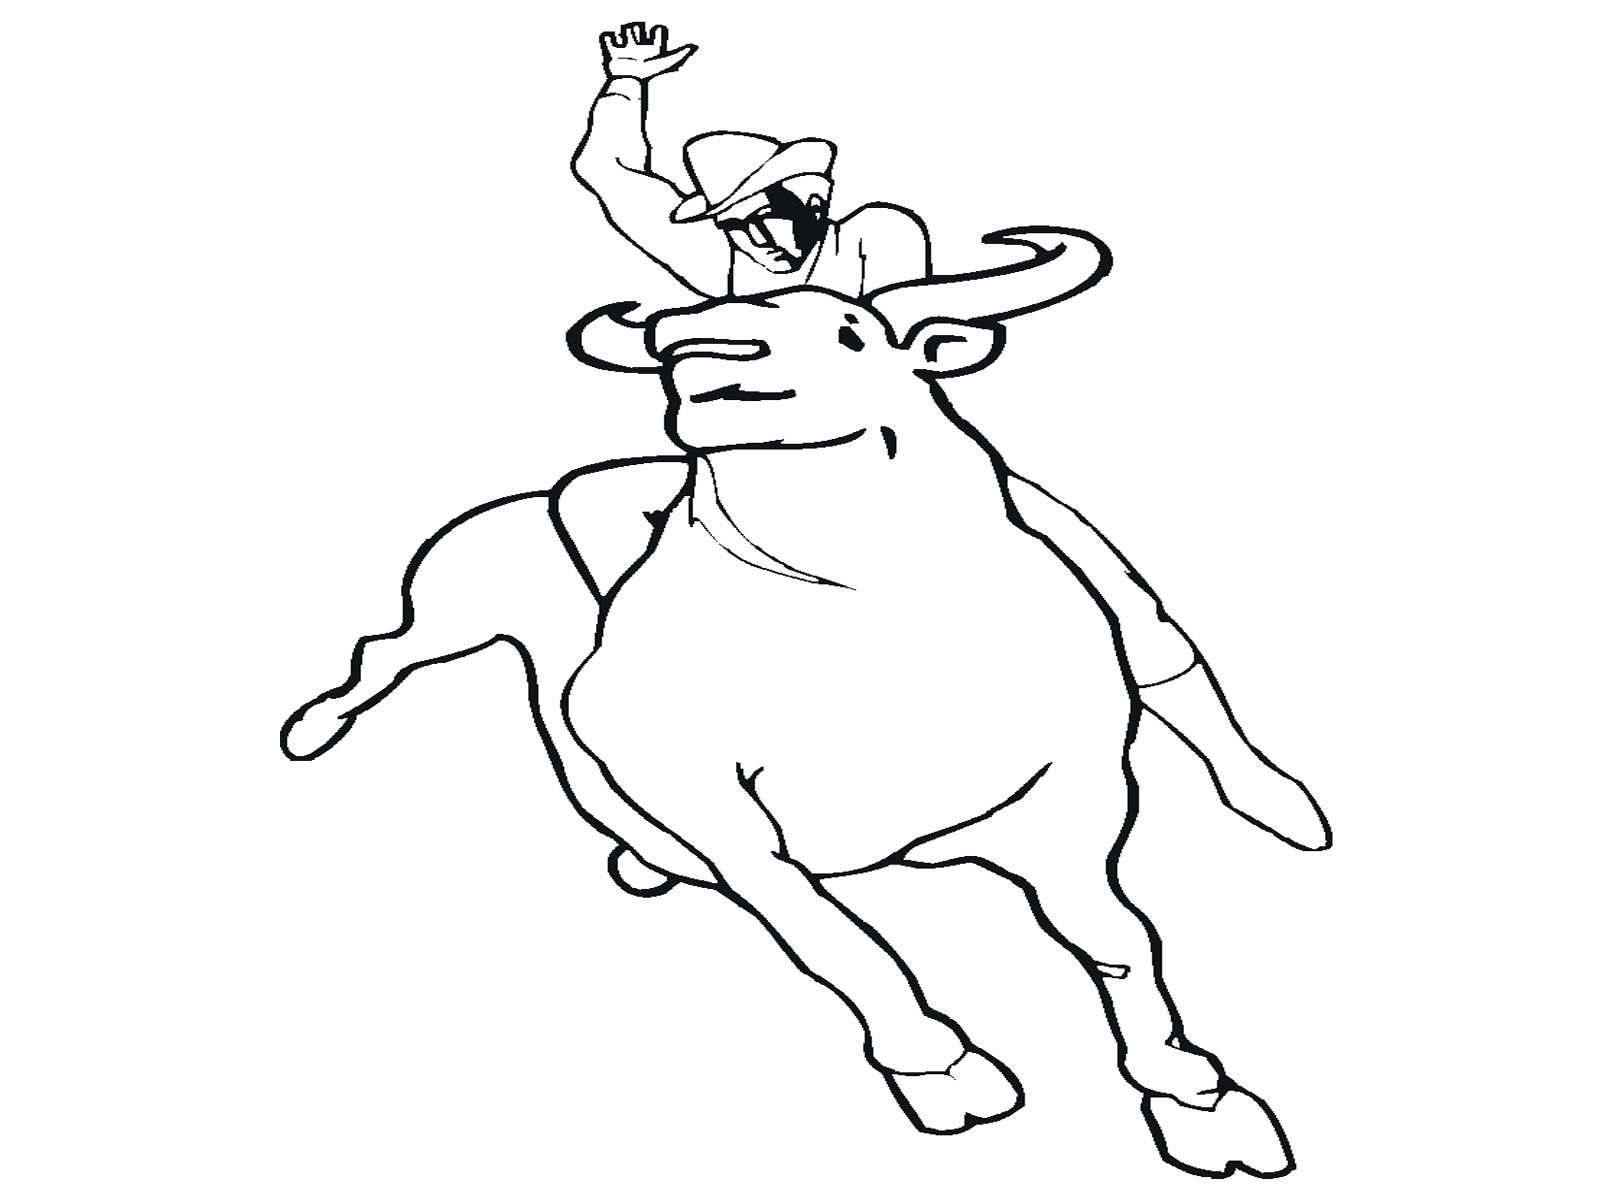 Bull Coloring Pages Printable | Realistic Coloring Pages